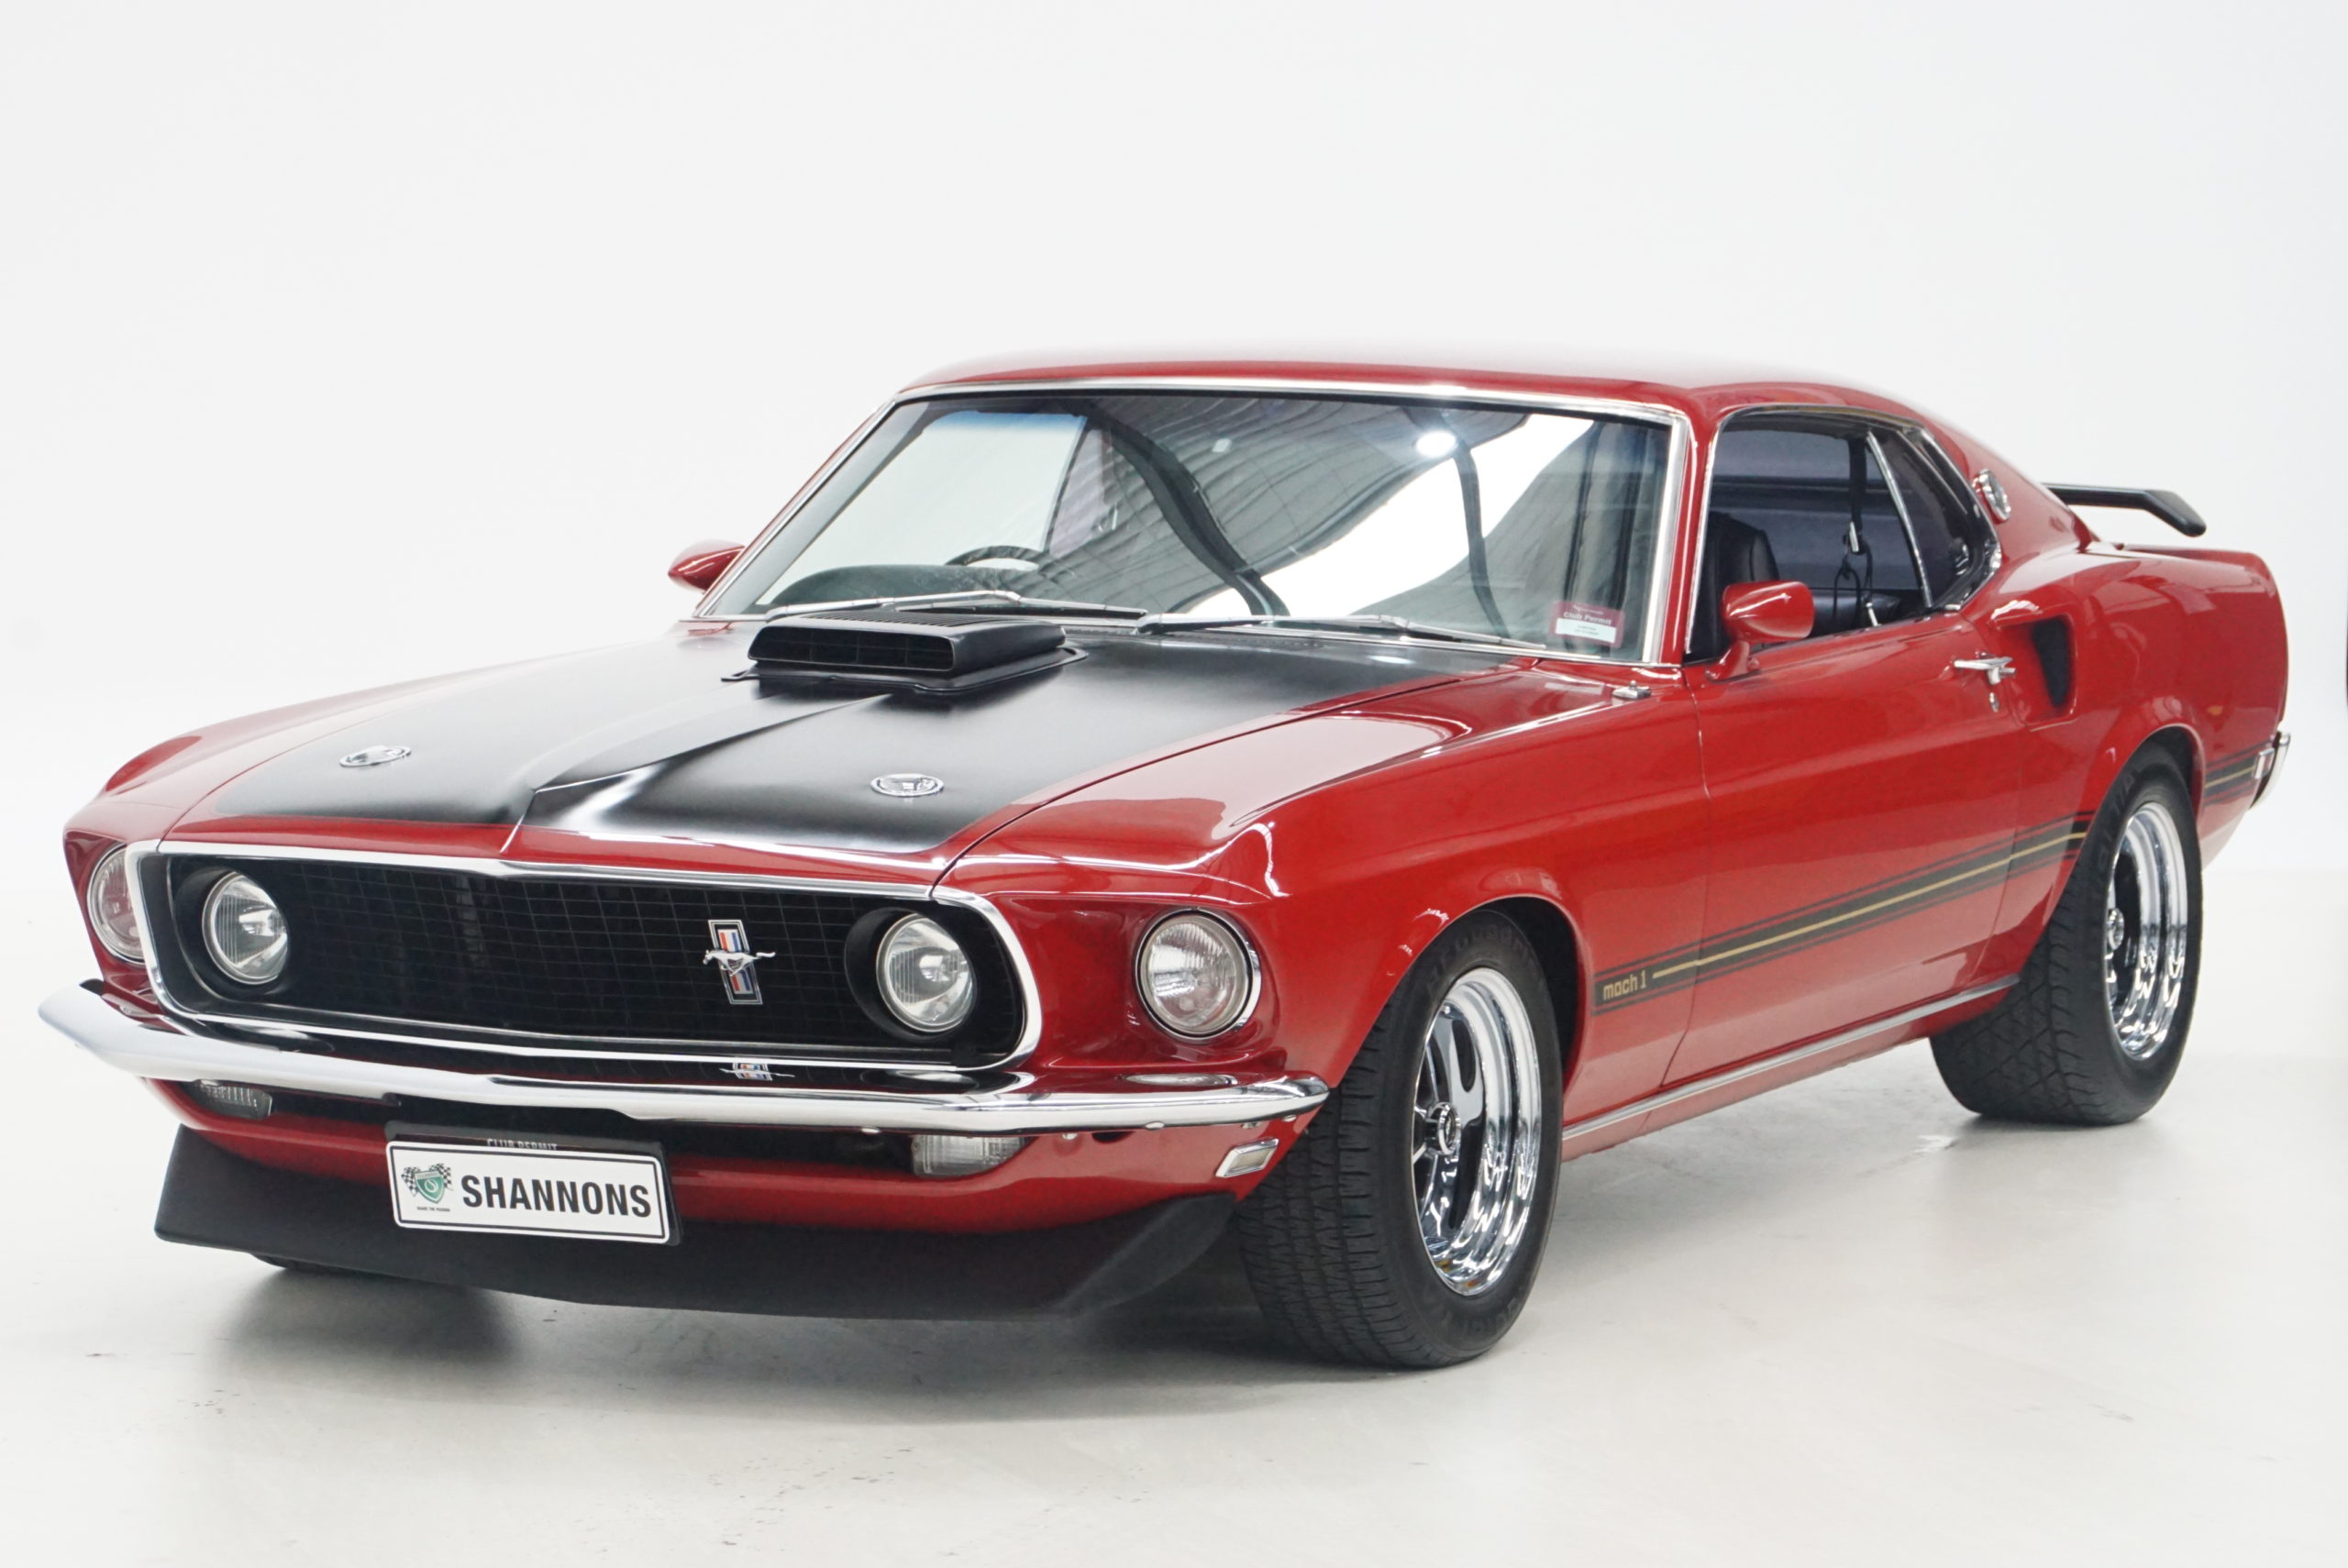 1969 Ford Mustang Mach 1 Fastback trois quarts avant gauche - Shannons Auctions avril 2021.